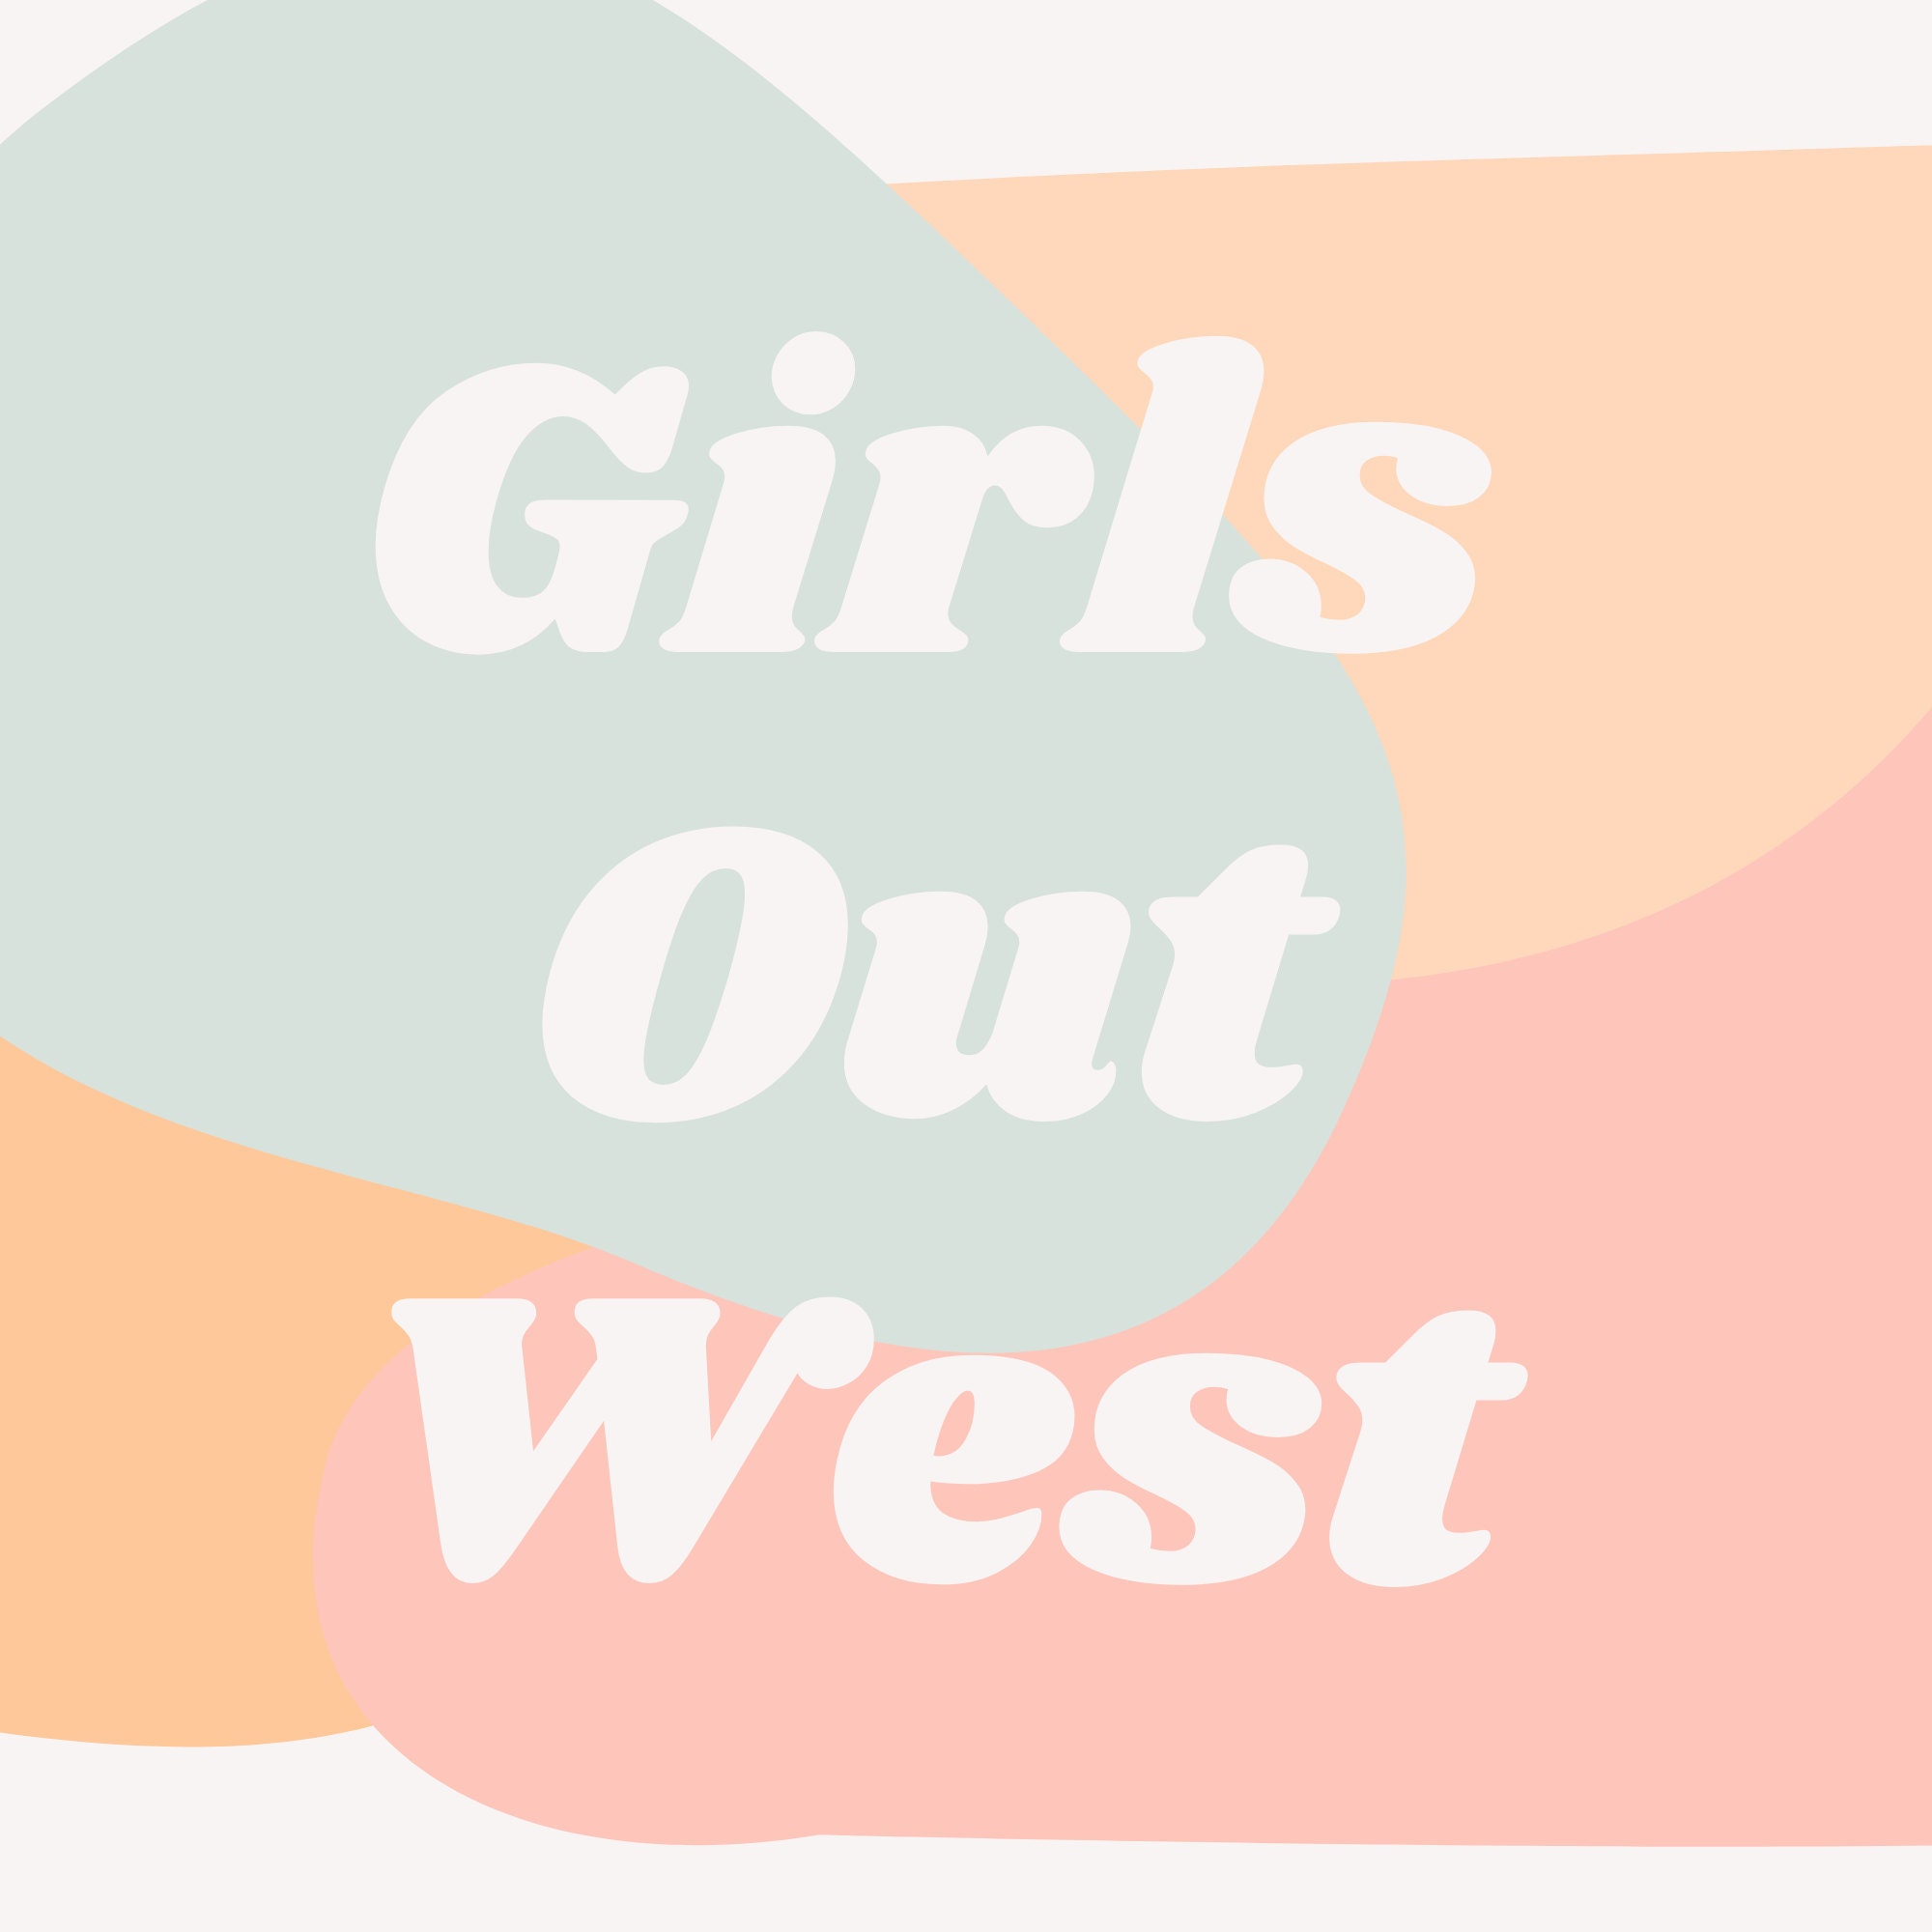 Out West Girls